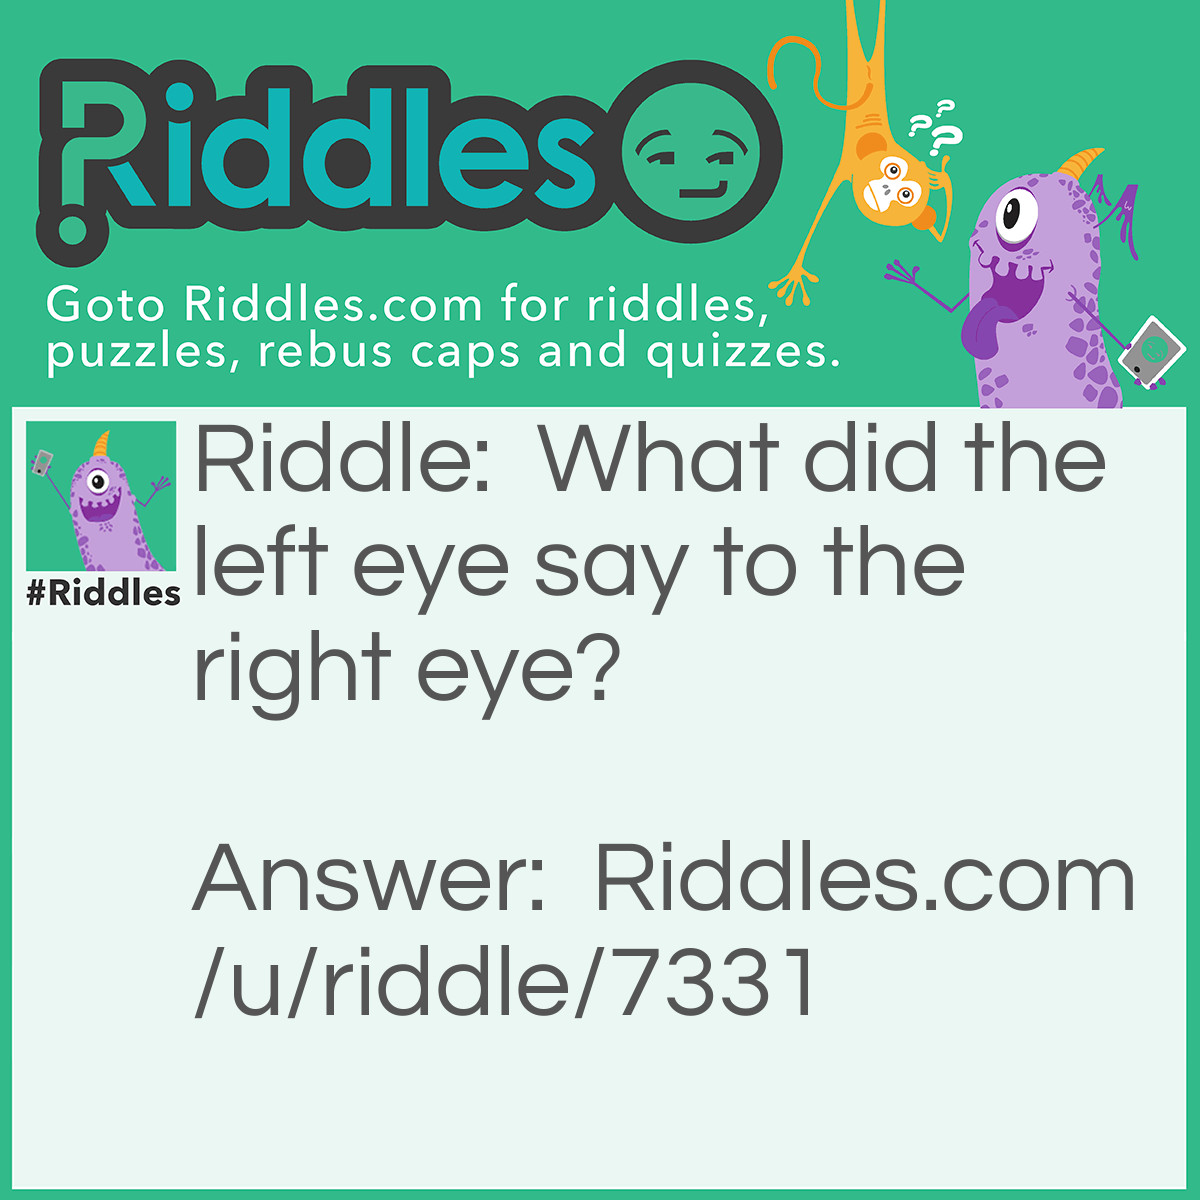 Riddle: What did the left eye say to the right eye? Answer: <span style="font-family: arial;">Between you and me, something smells.</span>